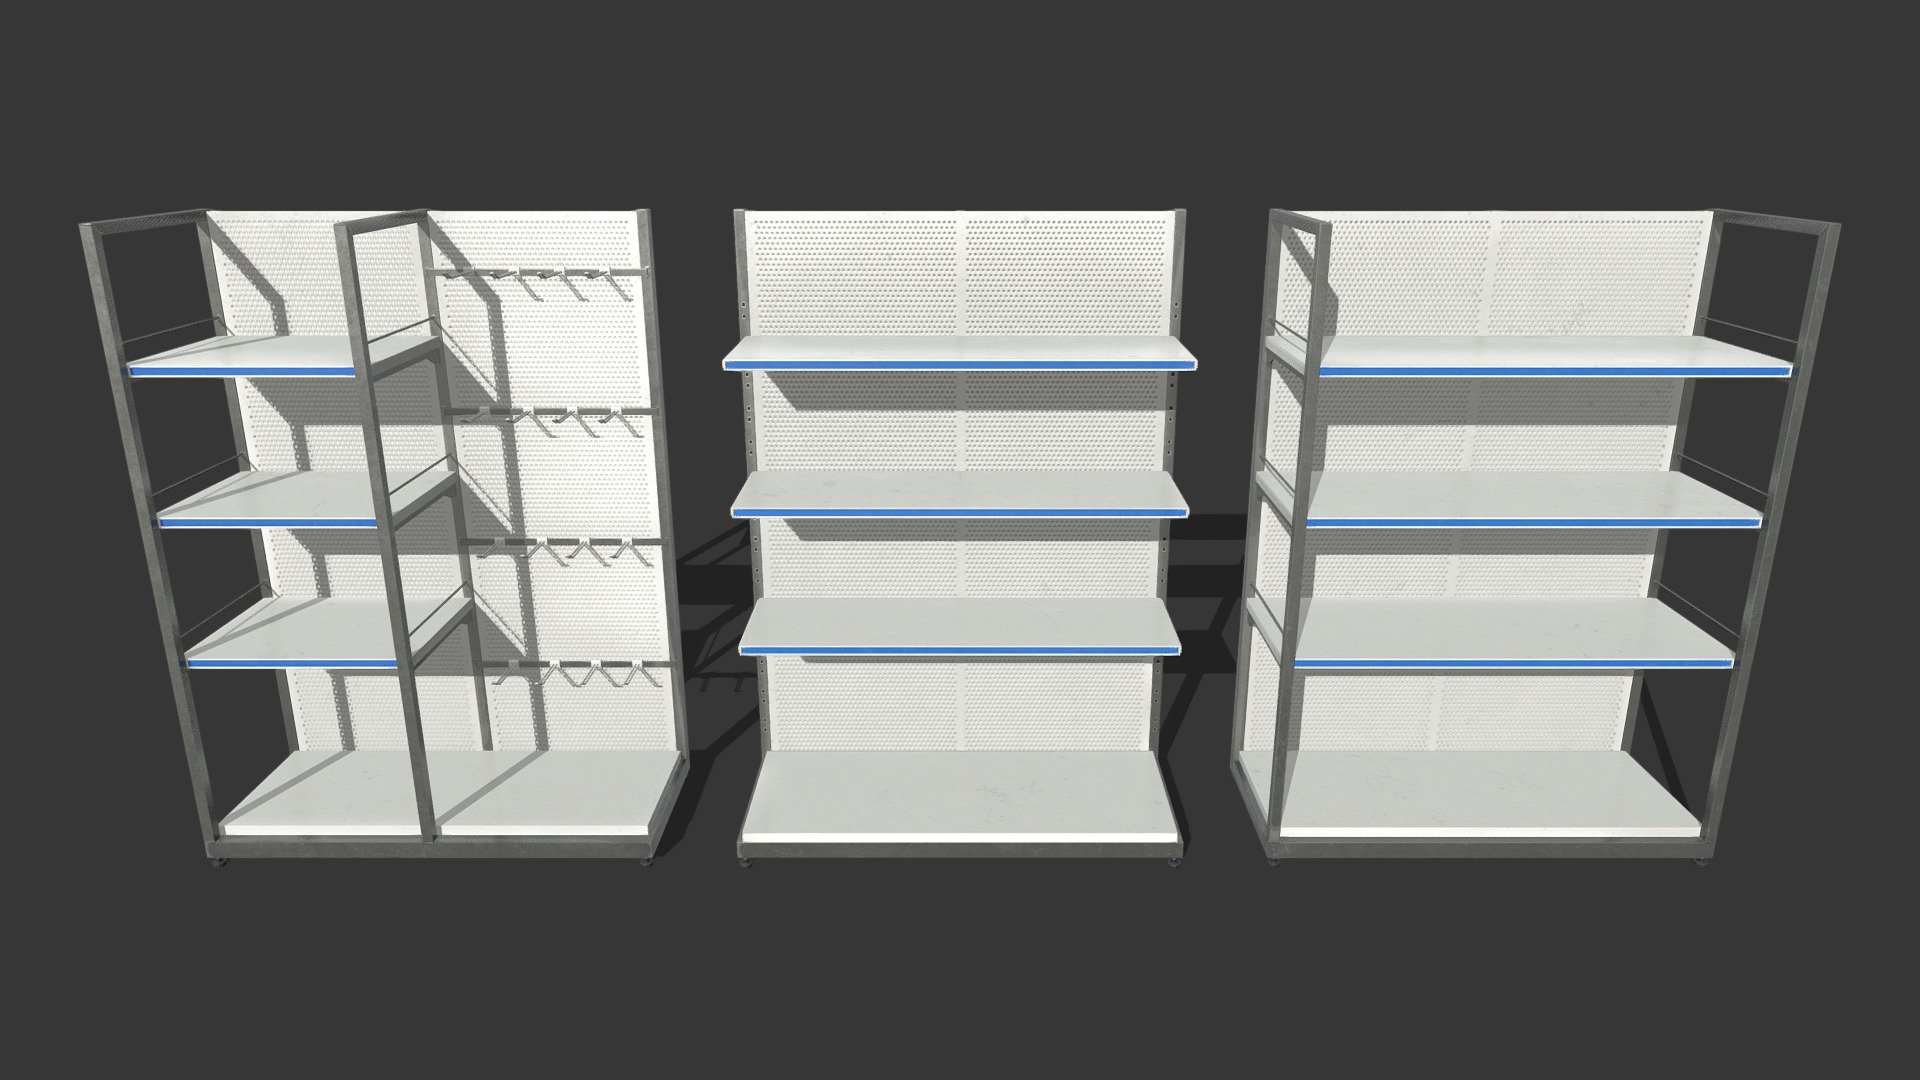 4k Store Shelf Pack

PBR Validate.

Fully optimized for games or Archviz.

Include 3 different models, each model have 1 set of material, all made in Substance Painter. 

All models size: 1,78m X 1,26m X 52cm

Model 1 = 507 Tri.
Model 2 = 1.212 Tri.
Model 3 = 3.510 Tri.

No moving parts.

Formats are: Fbx, Collada, Obj, Gltf.

12 Textures, size of 4096x4096.

3 - Base Color  + Alpha Channel, PNG 8bit.
3 - Metallic PNG 8bit.
3 - Normal PNG 8bit  OpenGL.
3 - Roughness PNG 8bit 3d model